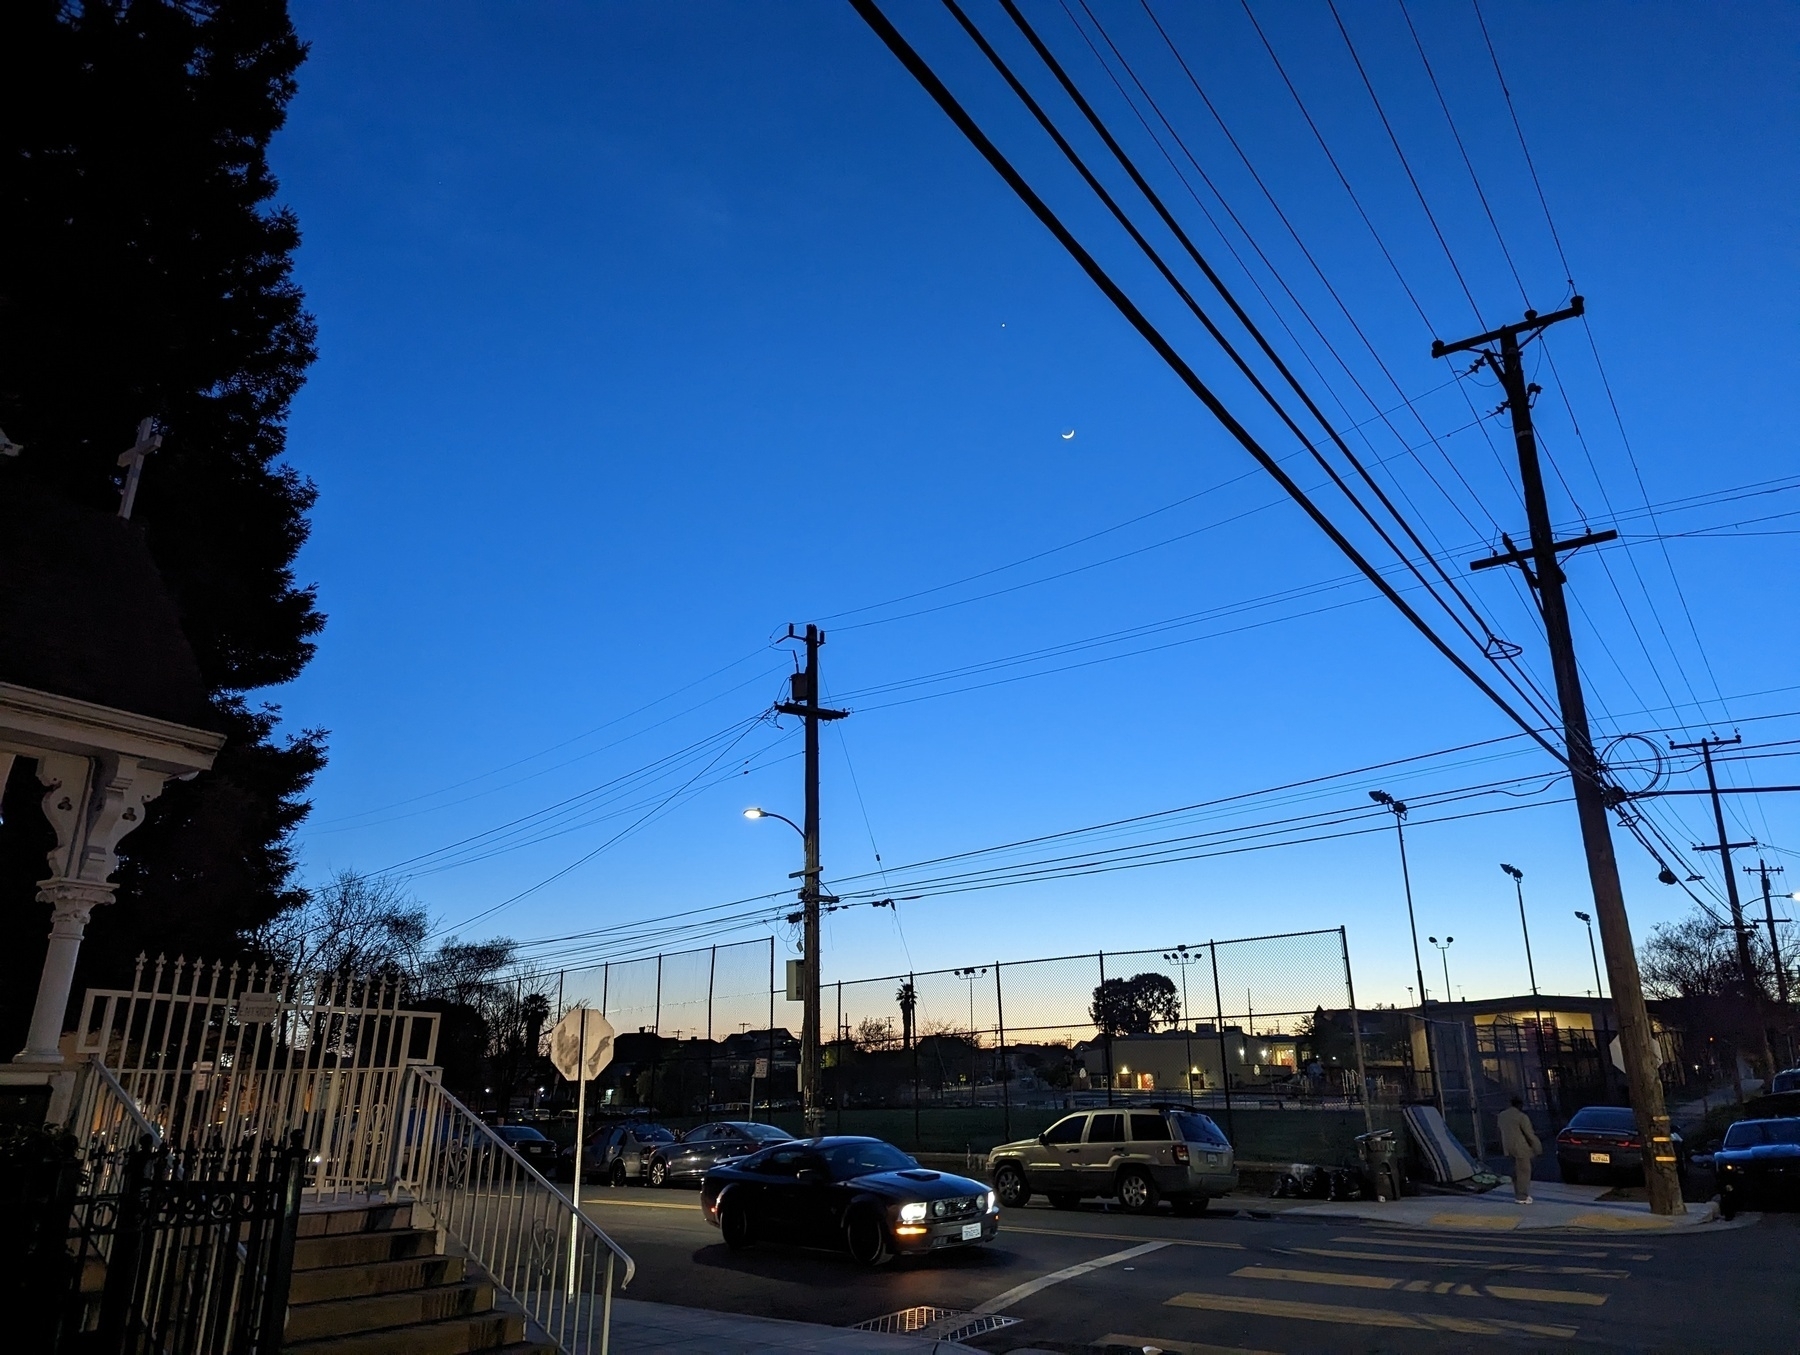 A view of deep blue 8 pm evening sky from near 23rd Avenue and Foothill Boulevard in Oakland, California on Saturday, April 22, 2023 next to an athletic field surrounded by lamps and power lines.